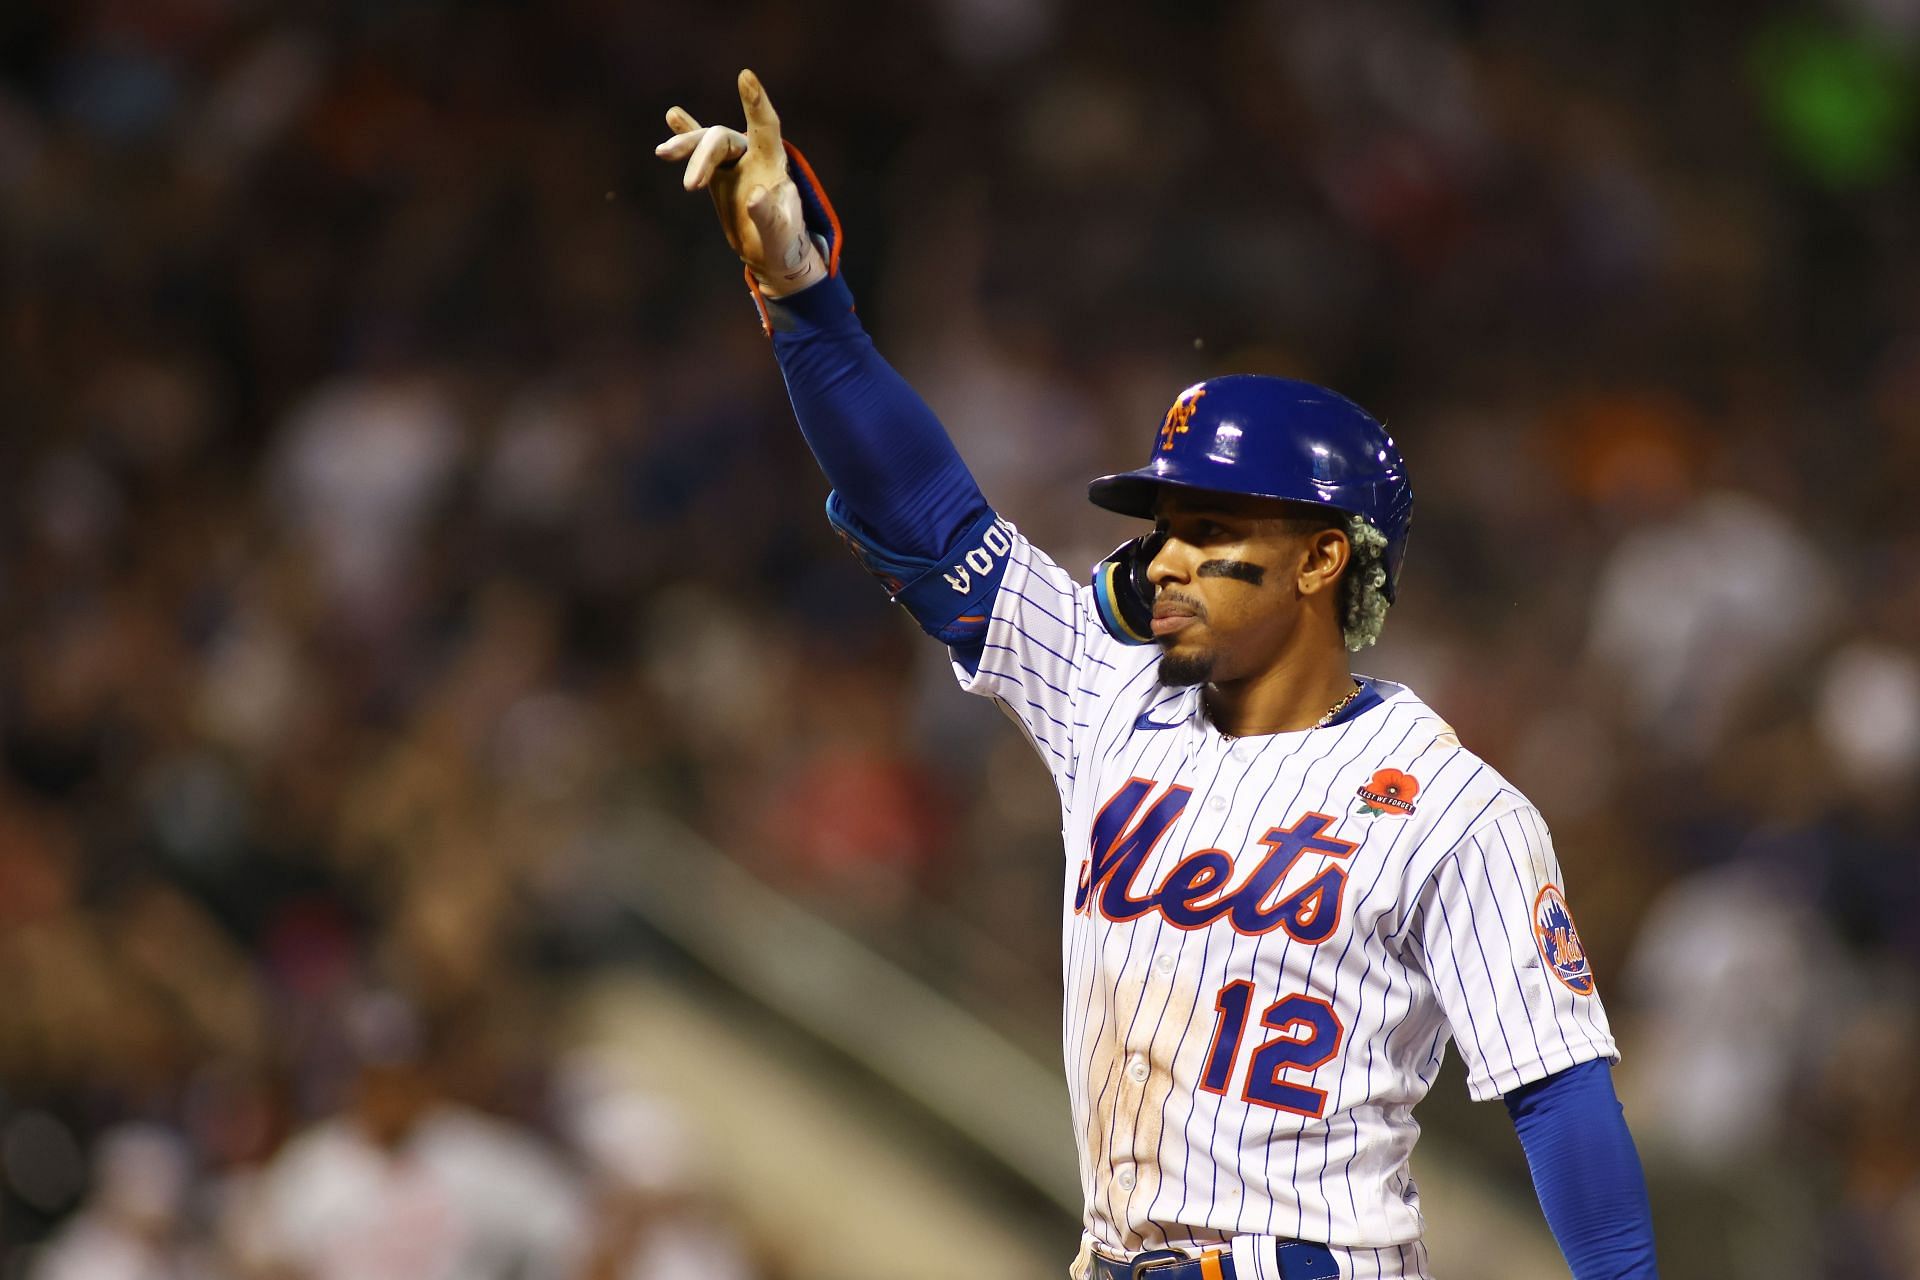 The Athletic] Mets' Francisco Lindor quietly played through injury